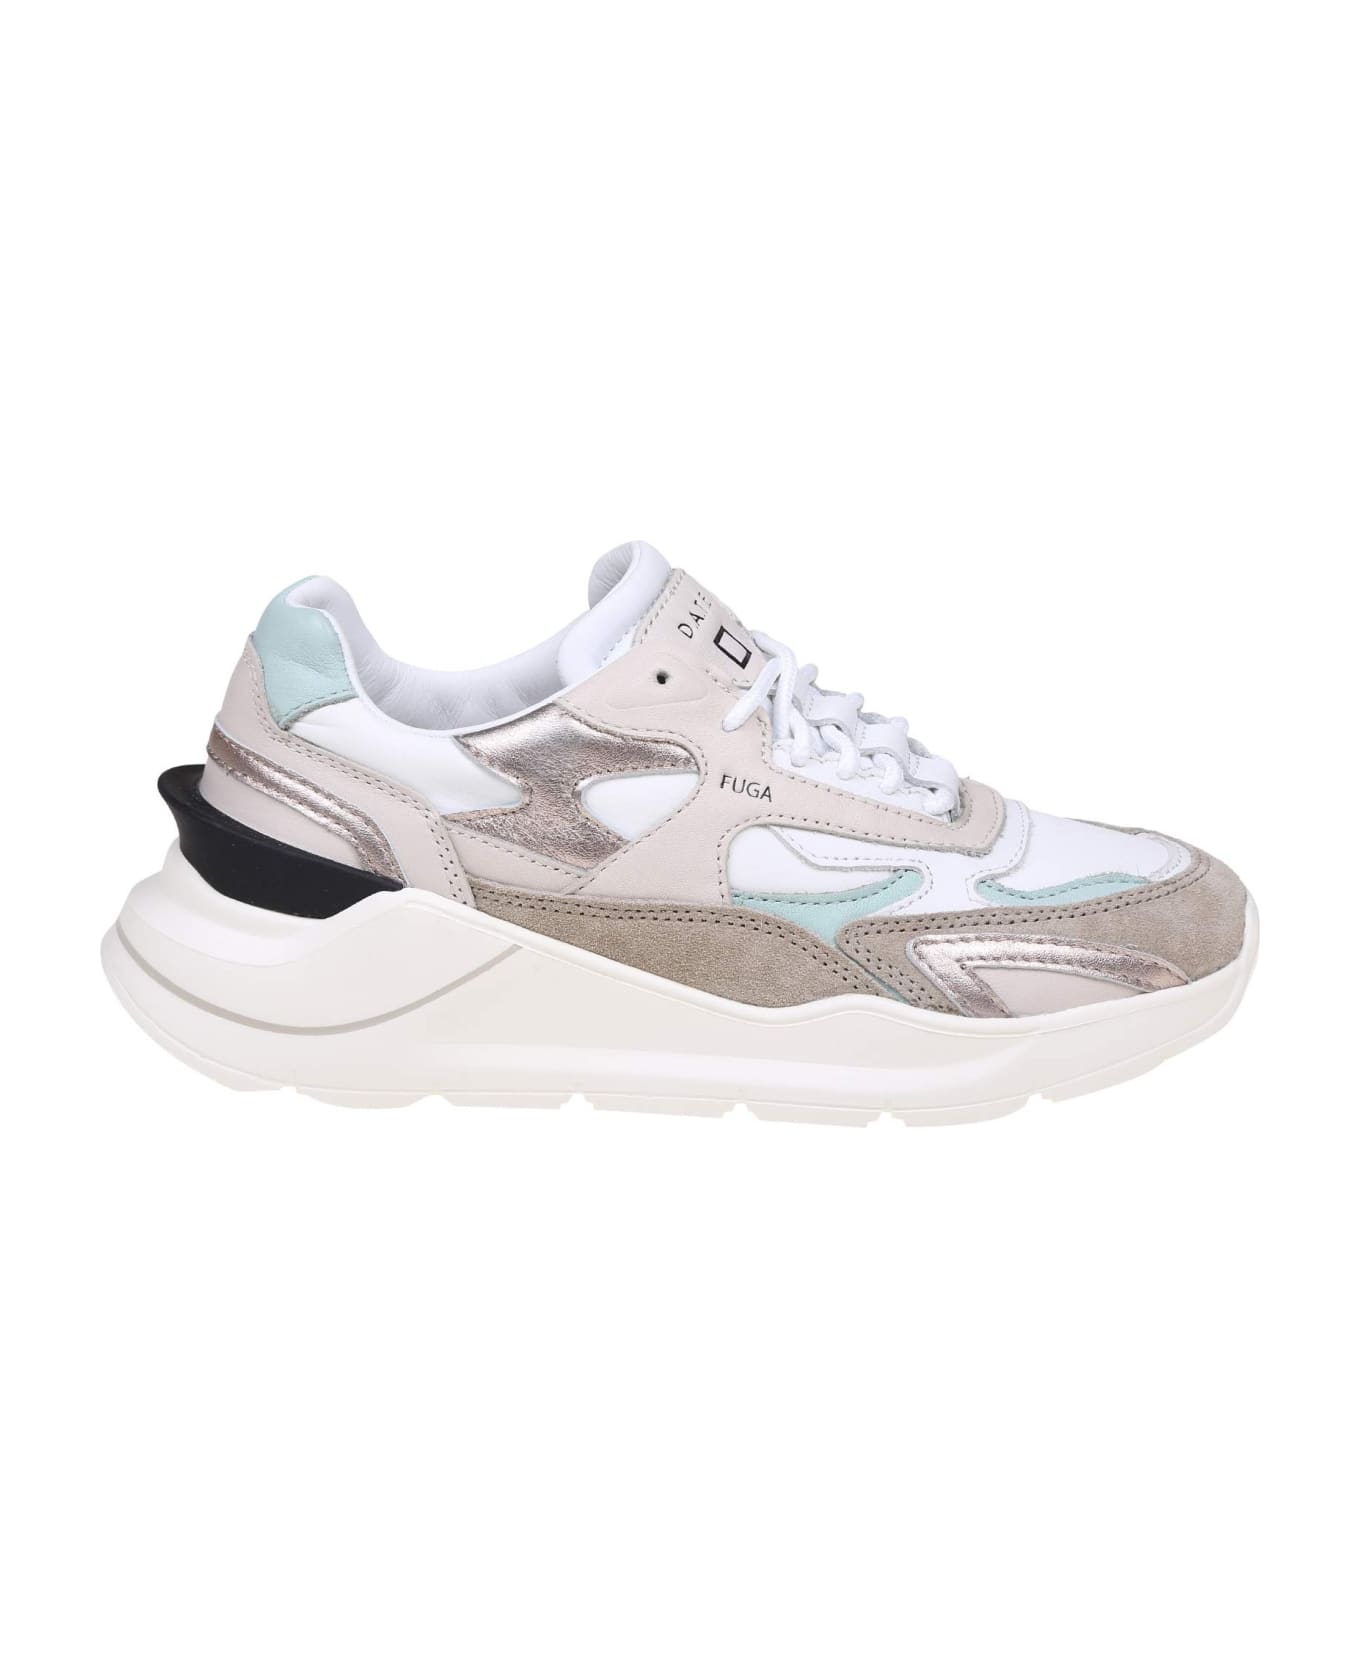 D.A.T.E. Fuga Sneakers In White/ Cream Leather And your - Cream